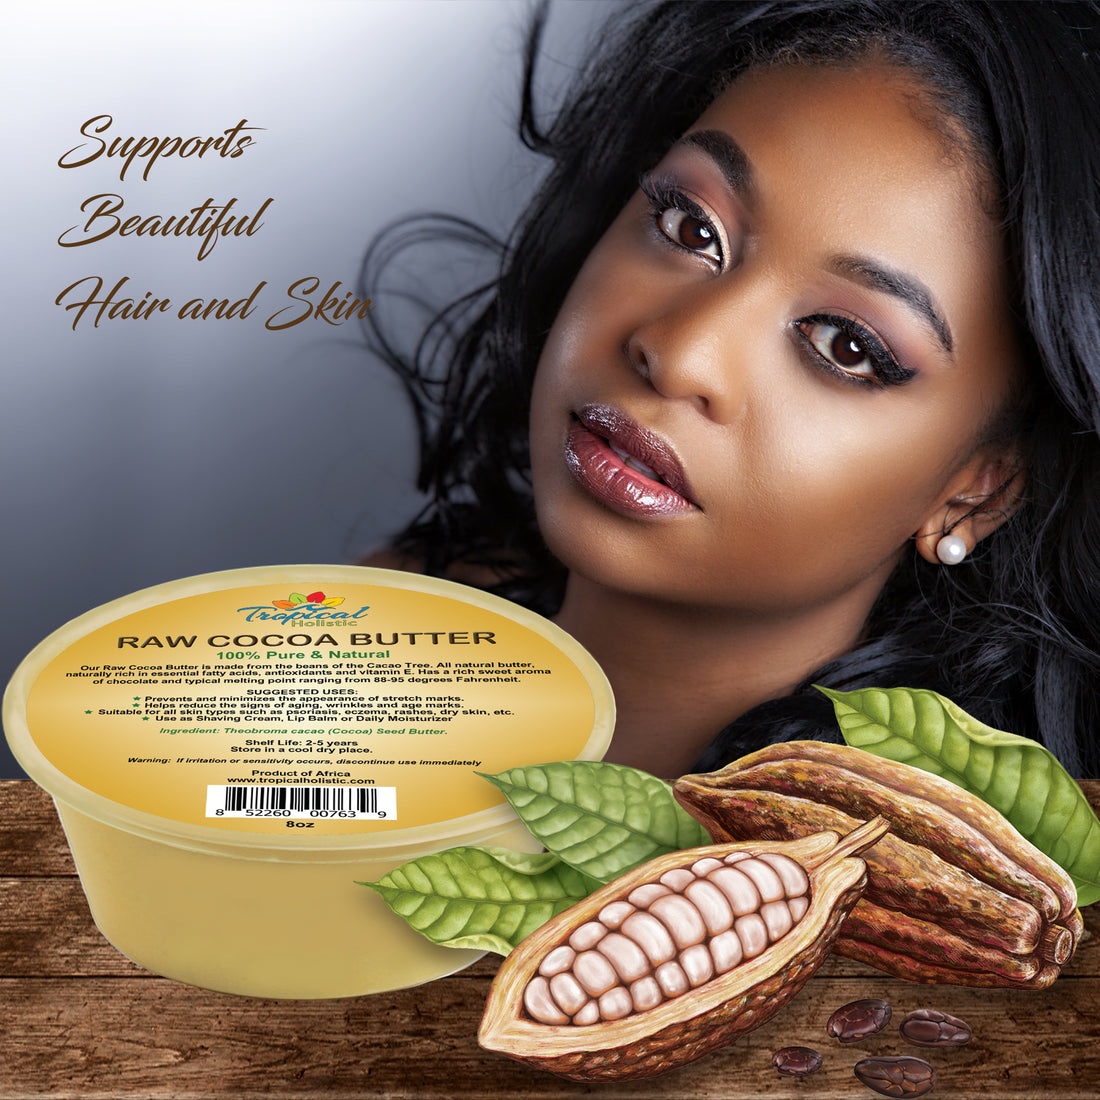 Moisturizing Cocoa Butter for Your Skin and Hair